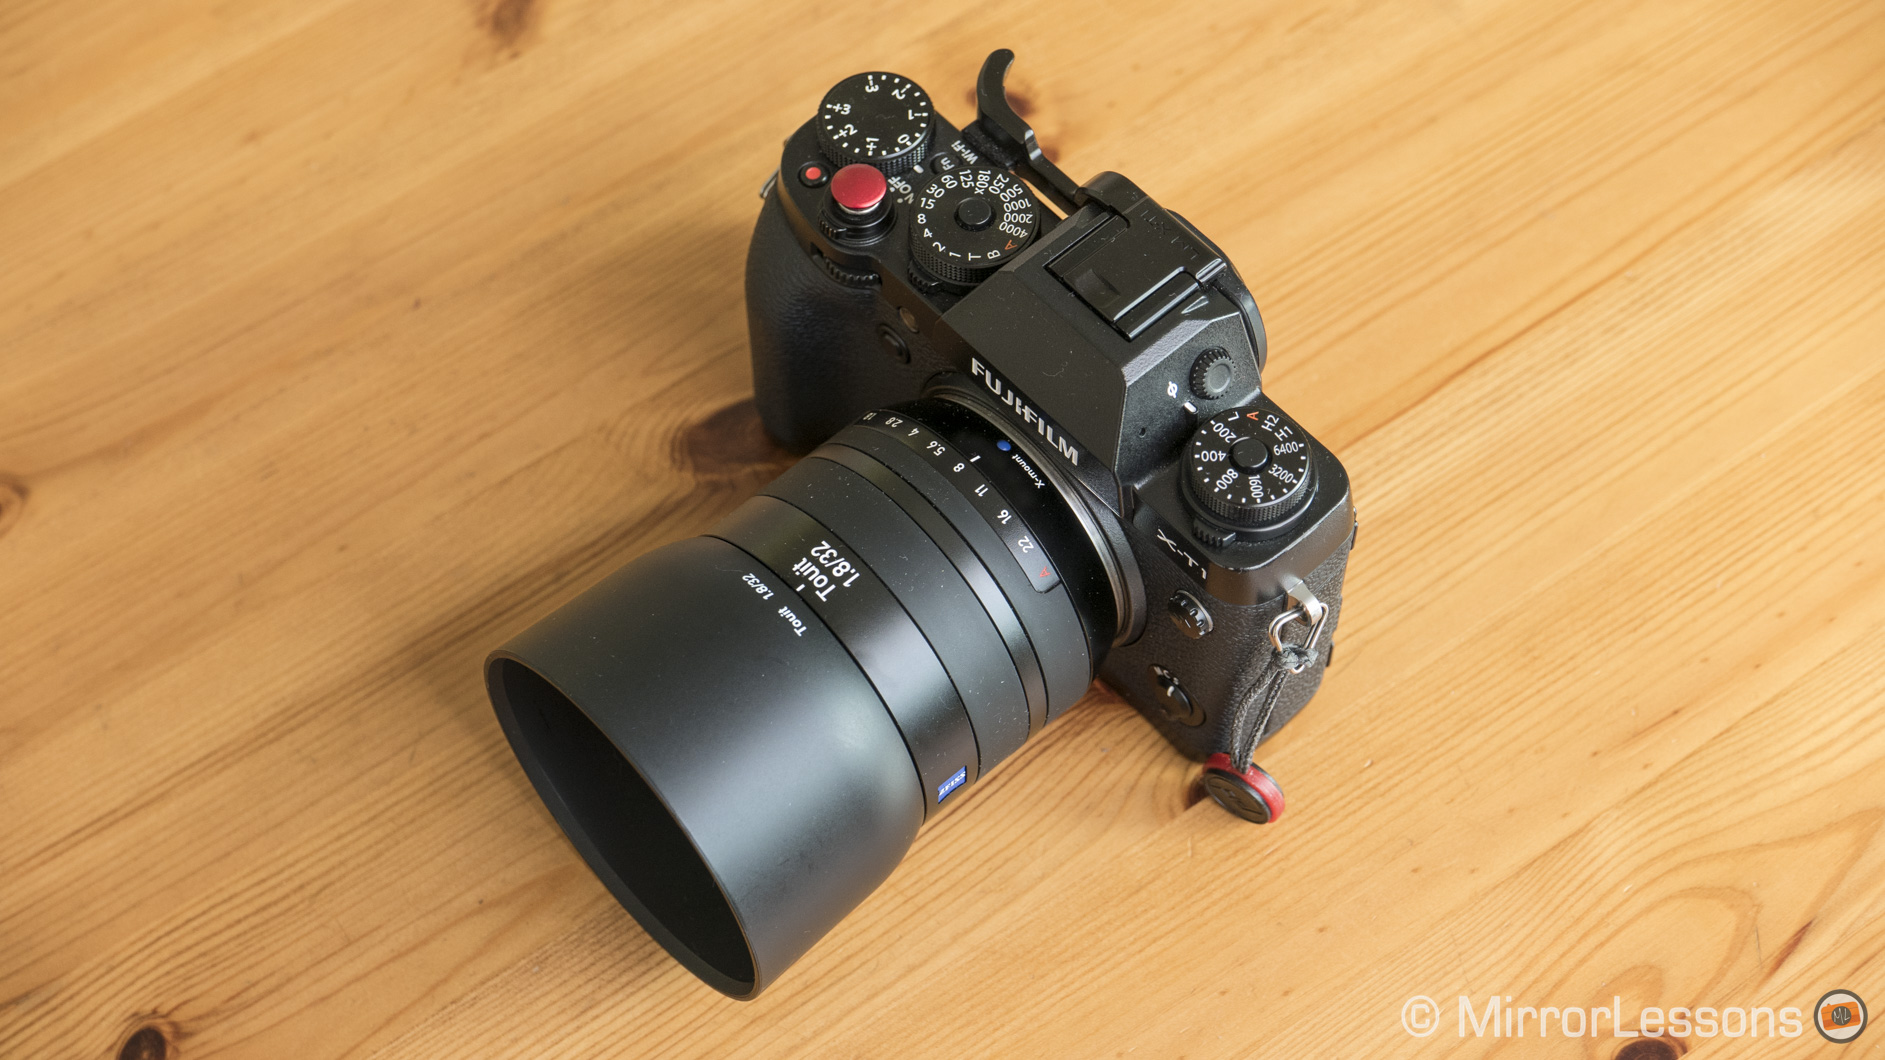 smal halfgeleider verzekering The Tale of Two Touits – Part II – Touit 32mm f/1.8 Review